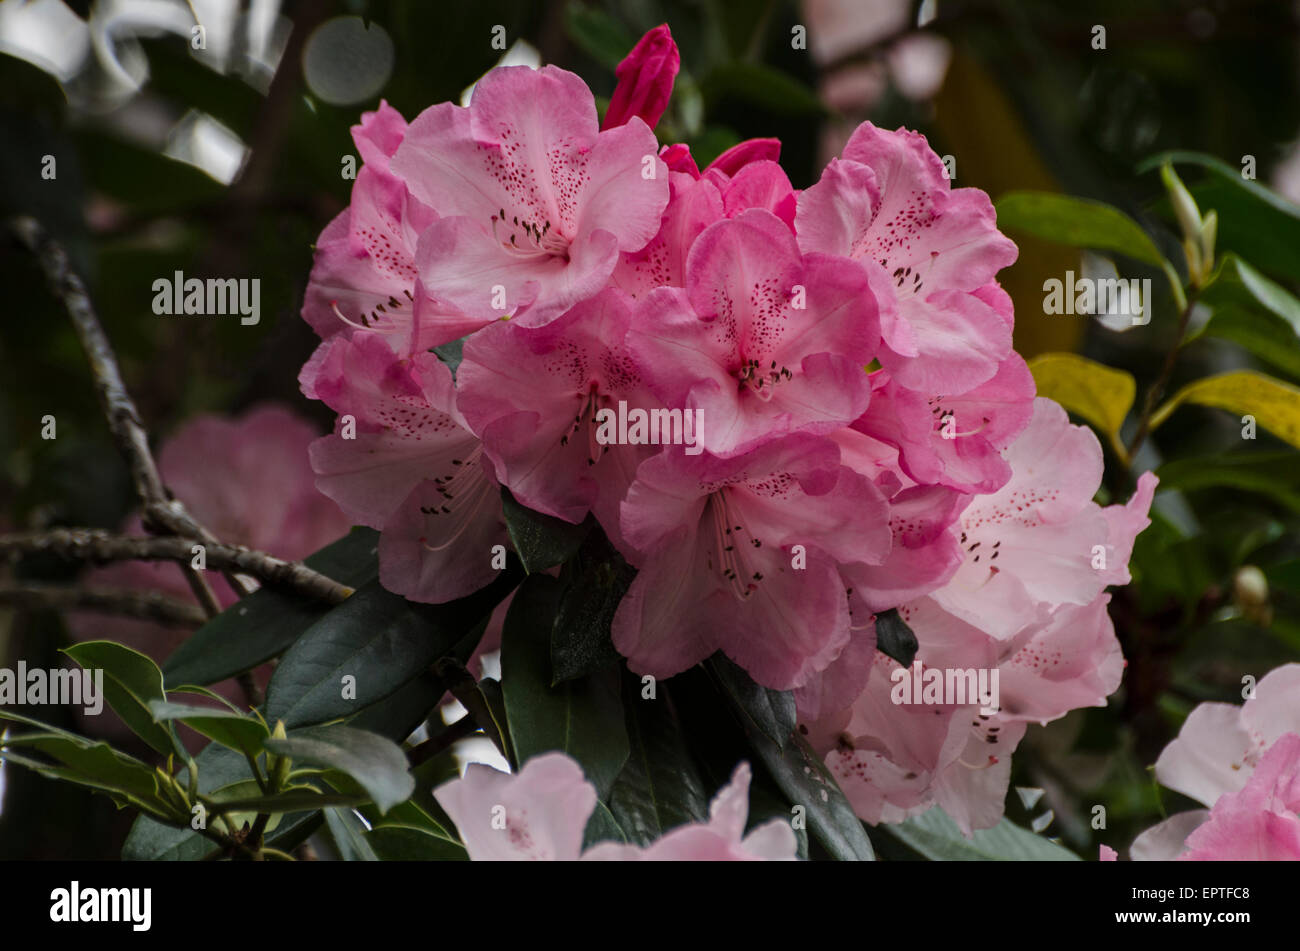 The early spring bloom of an evergreen Rhododendron, Sierra foothills of Northern California.. Stock Photo